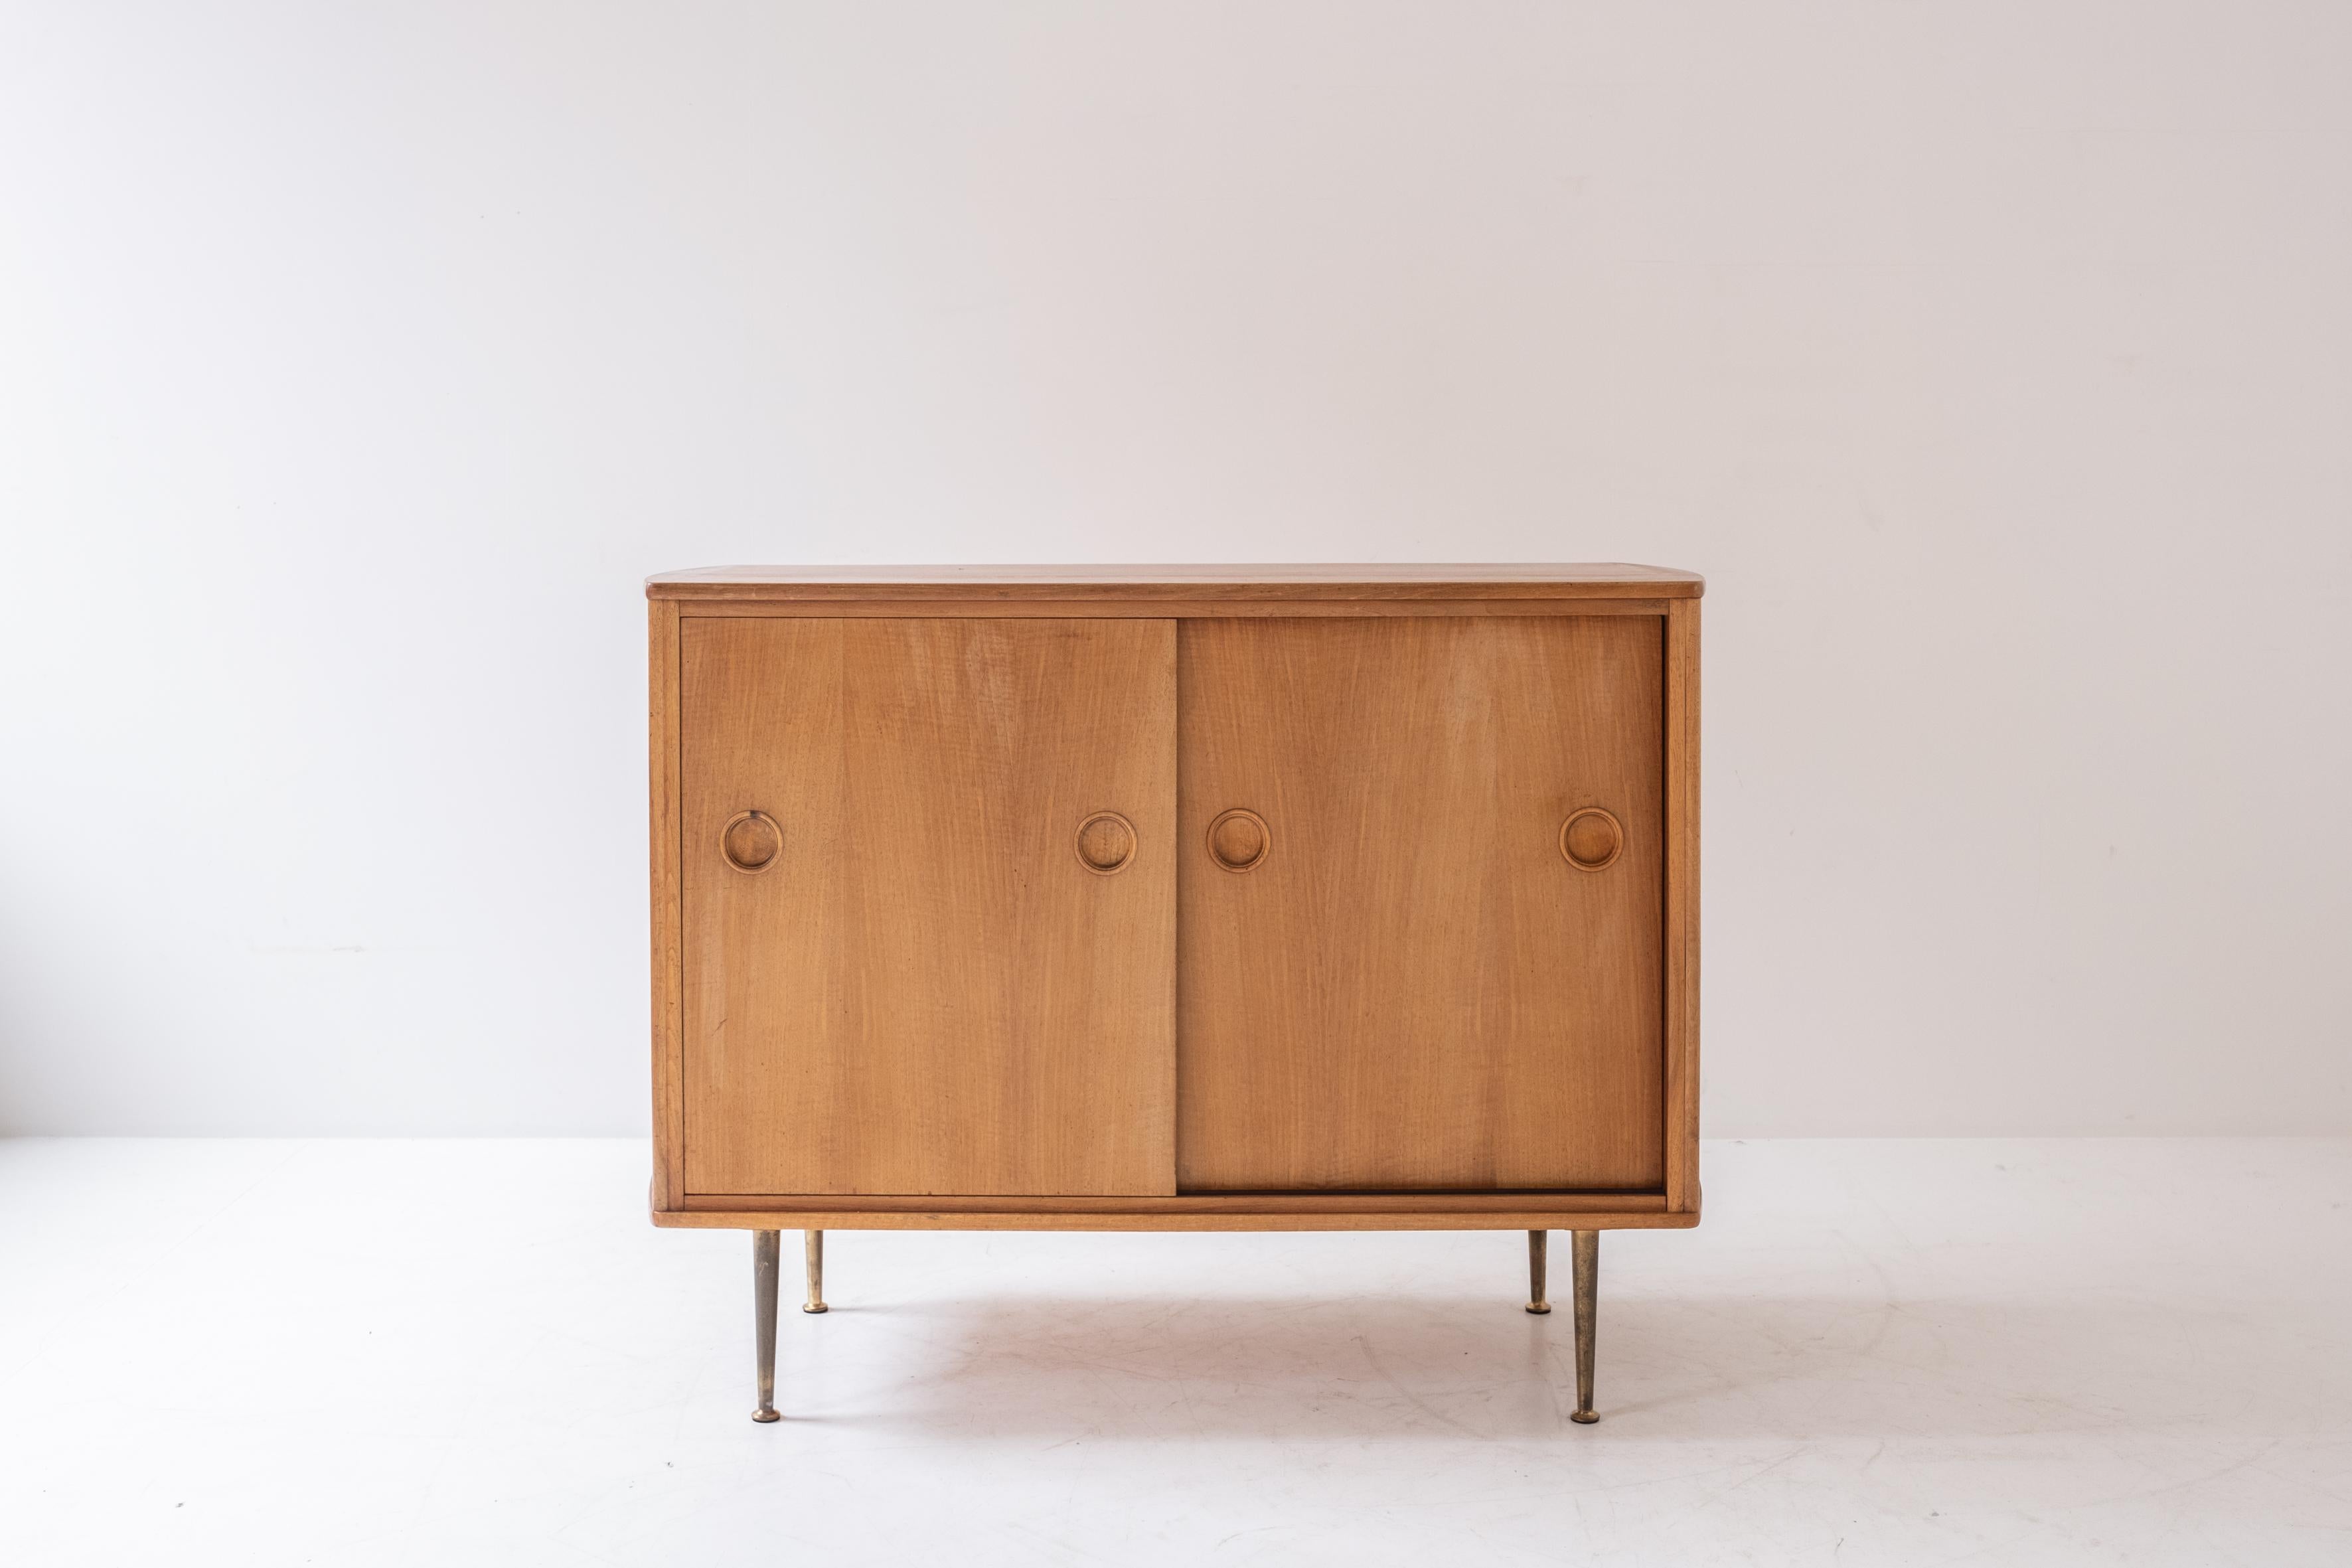 Cabinet designed by William Watting for Fristho Franeker, The Netherlands 1950’s. This cabinet is made out of walnut and has a matching vitrine cabinet on top. Well presented original condition.